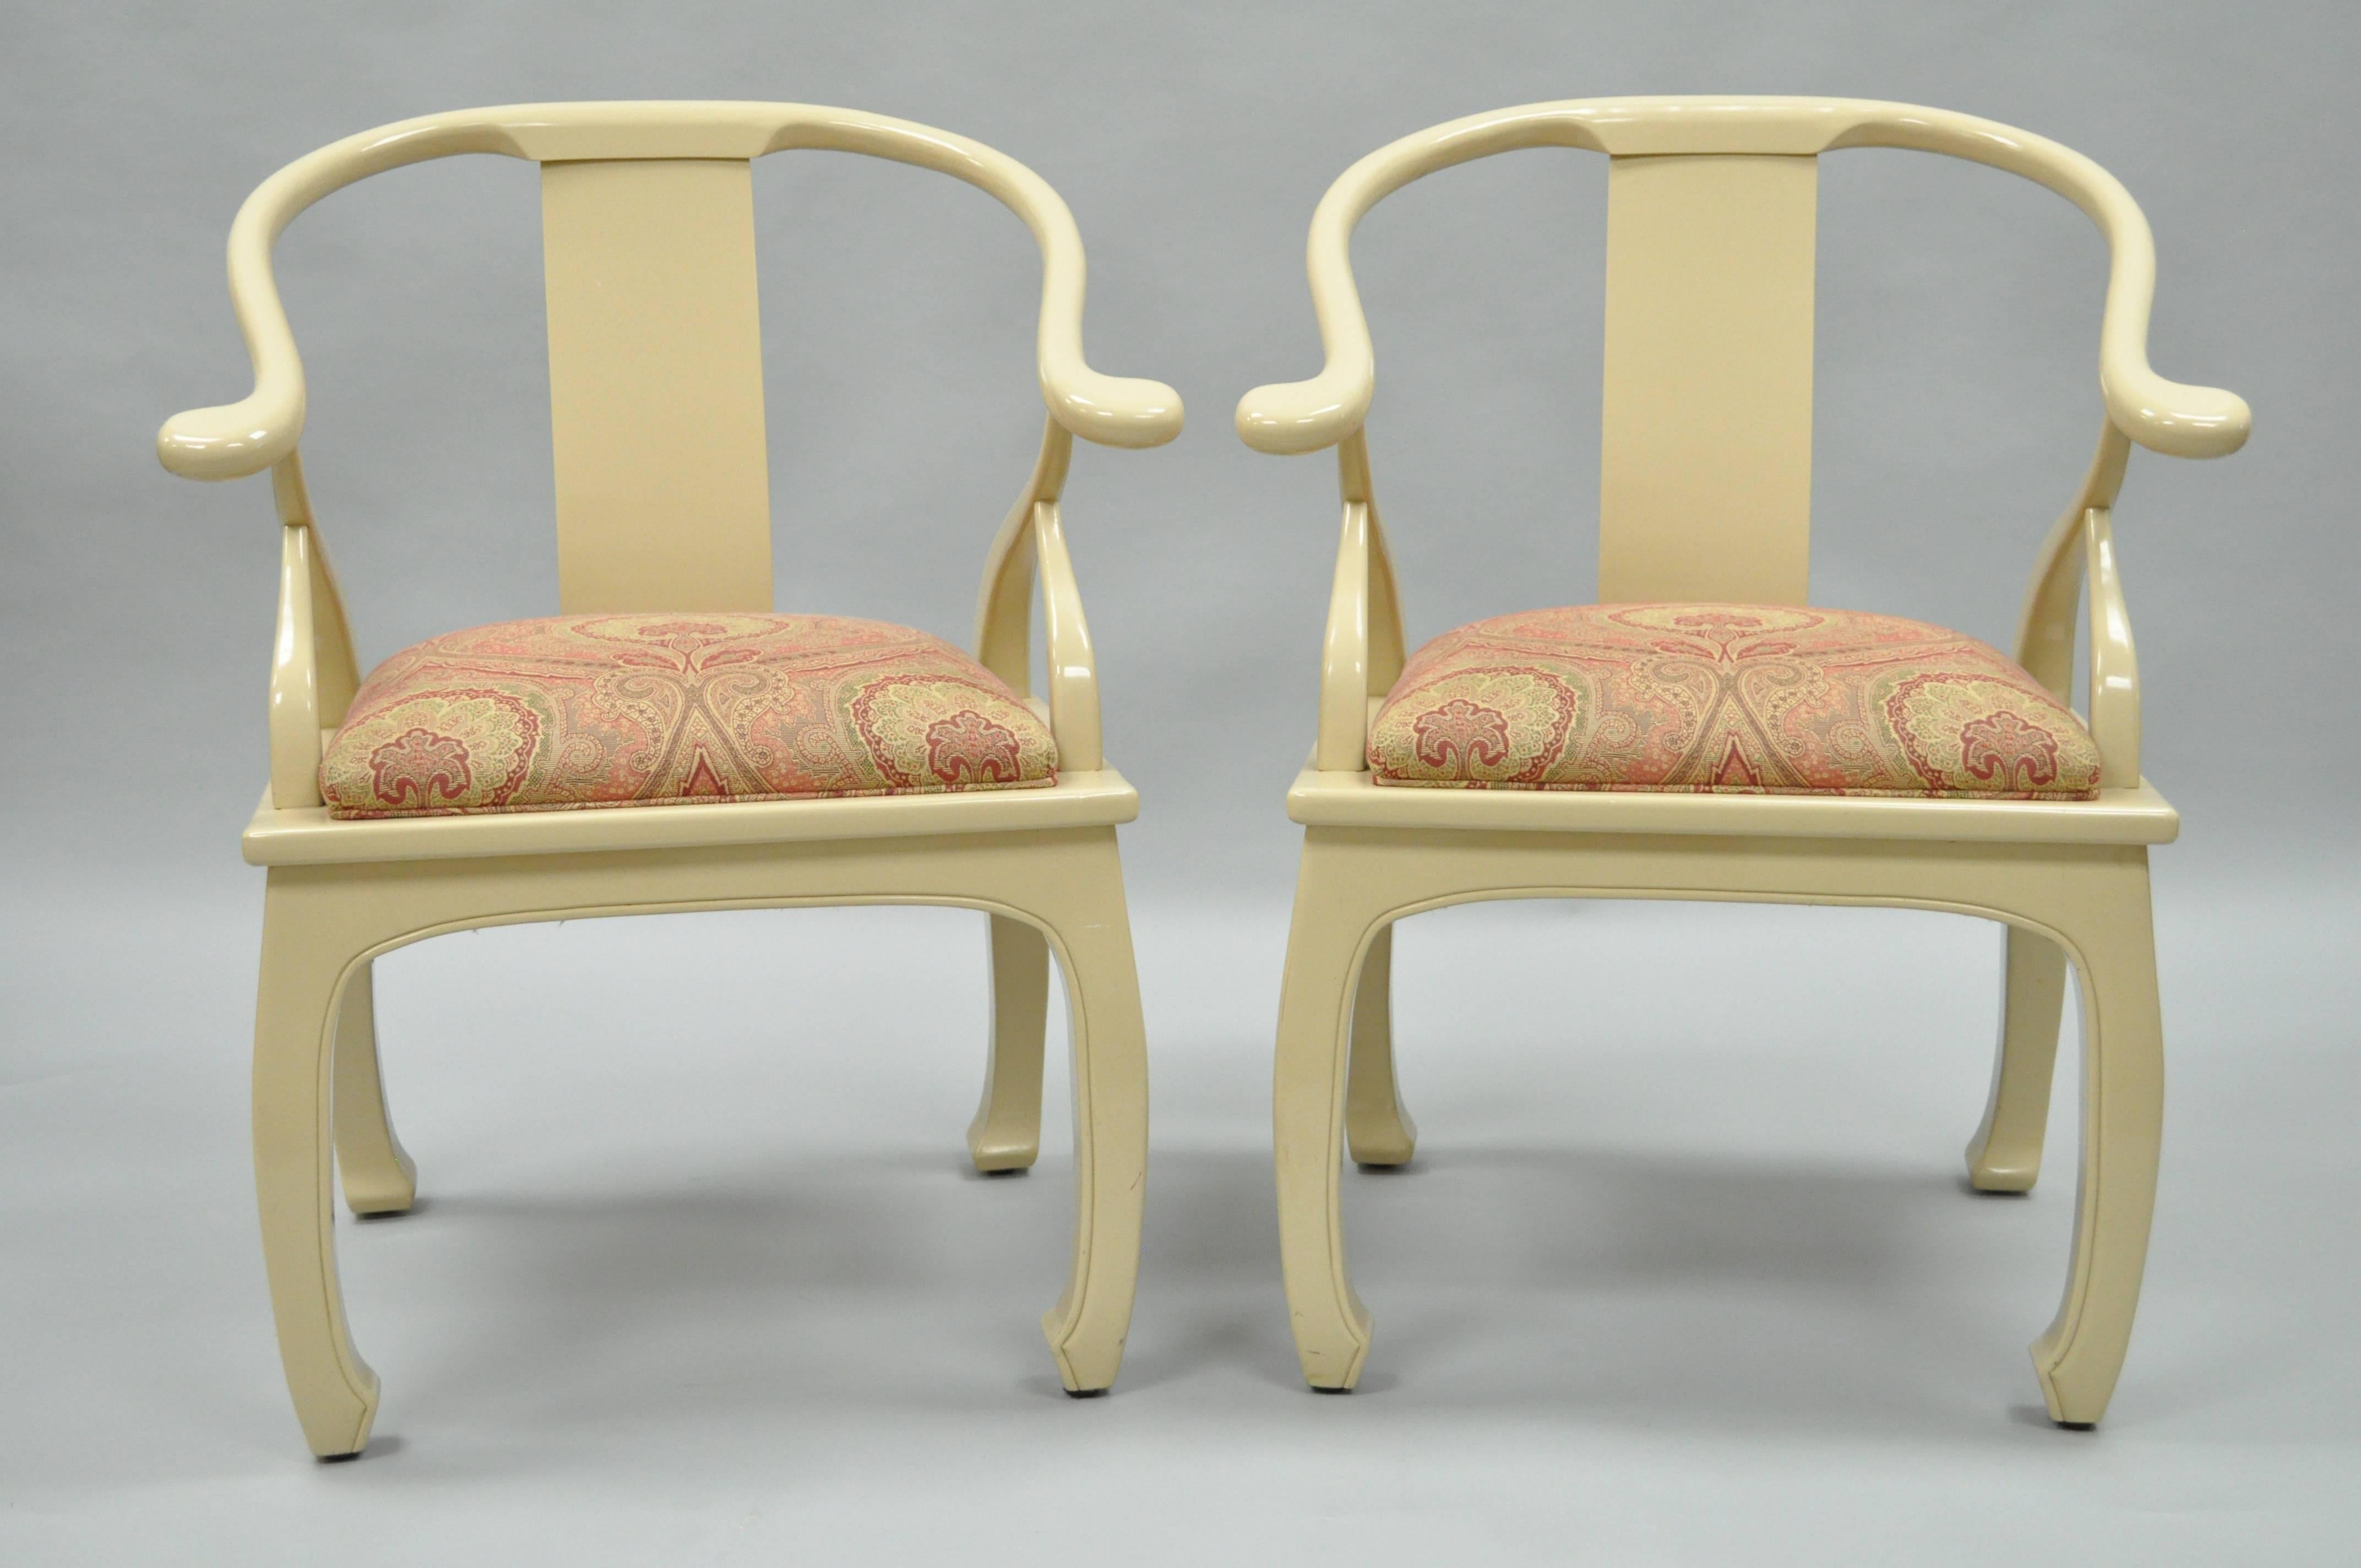 Quality pair of vintage decorator cream lacquered Asian inspired lounge chairs. The pair features solid wood frames, cream lacquered finish, horseshoe barrel backs, burgundy and gold upholstered seats, angled arm supports and classic Ming dynasty